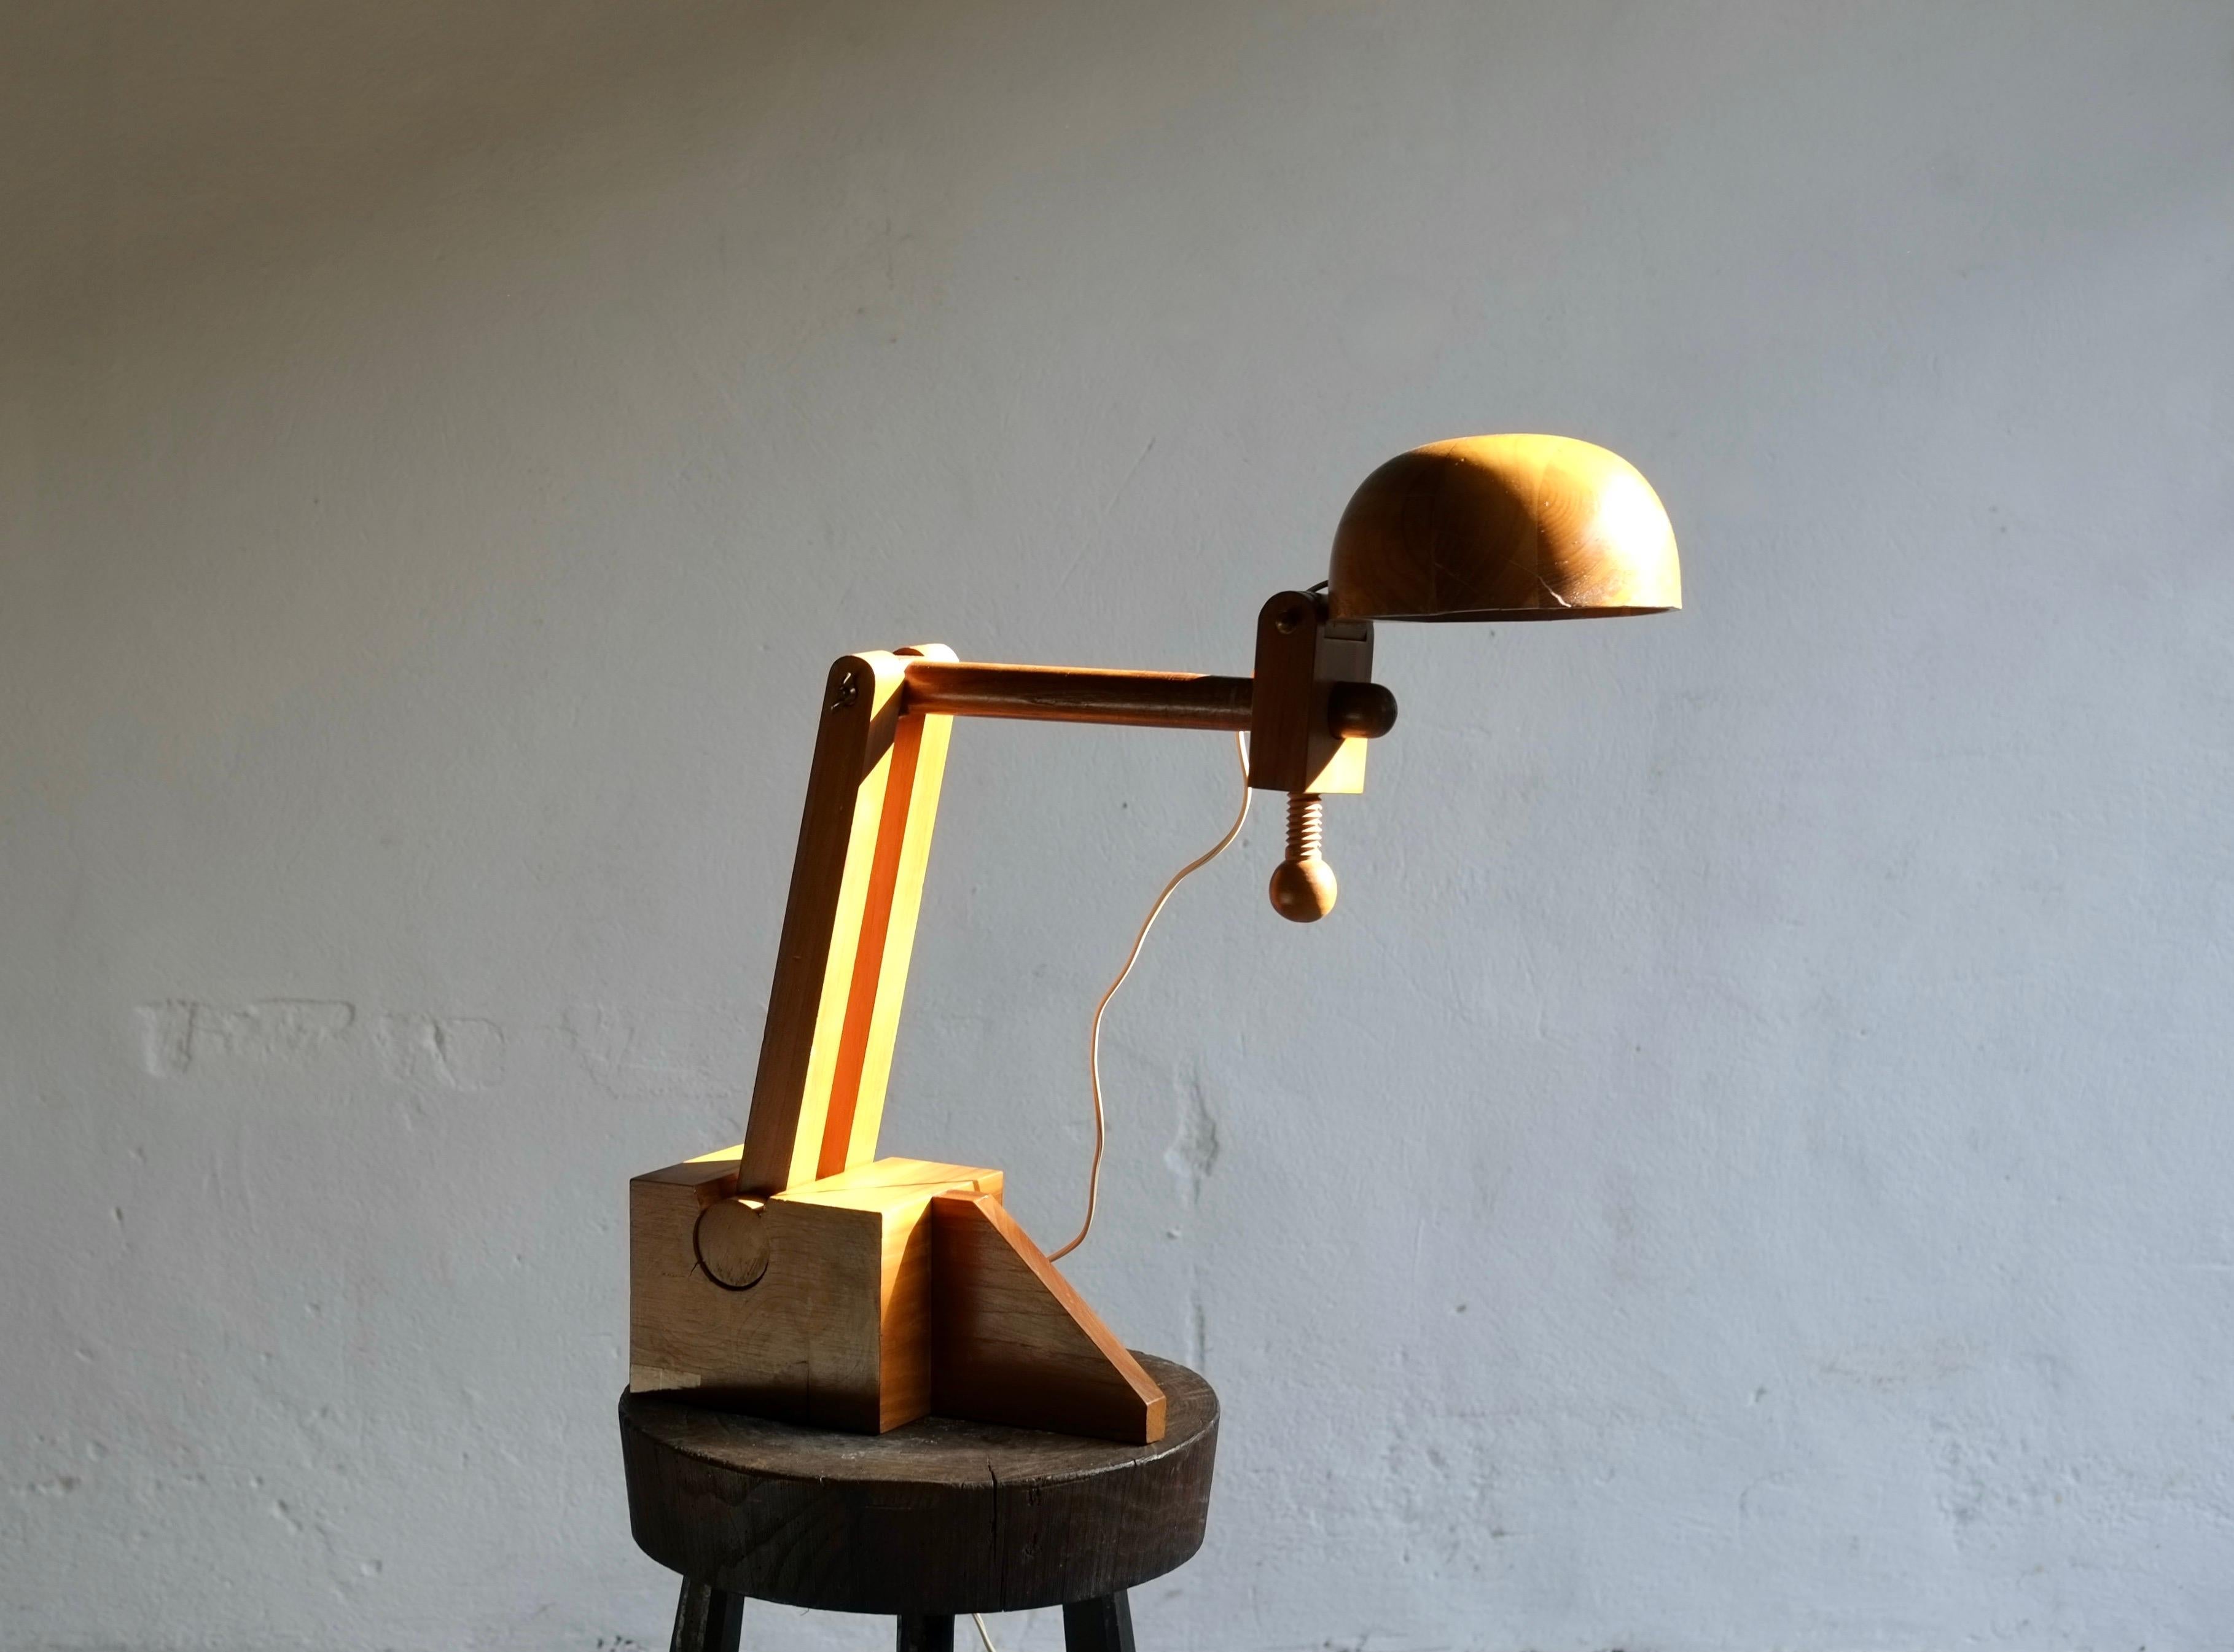 An adjustable solid wood desk lamp by Italian designer Paolo Pallucco for Pallucco, Roma, circa 1960's.

Oversized scale, the lamp is in very good vintage condition.